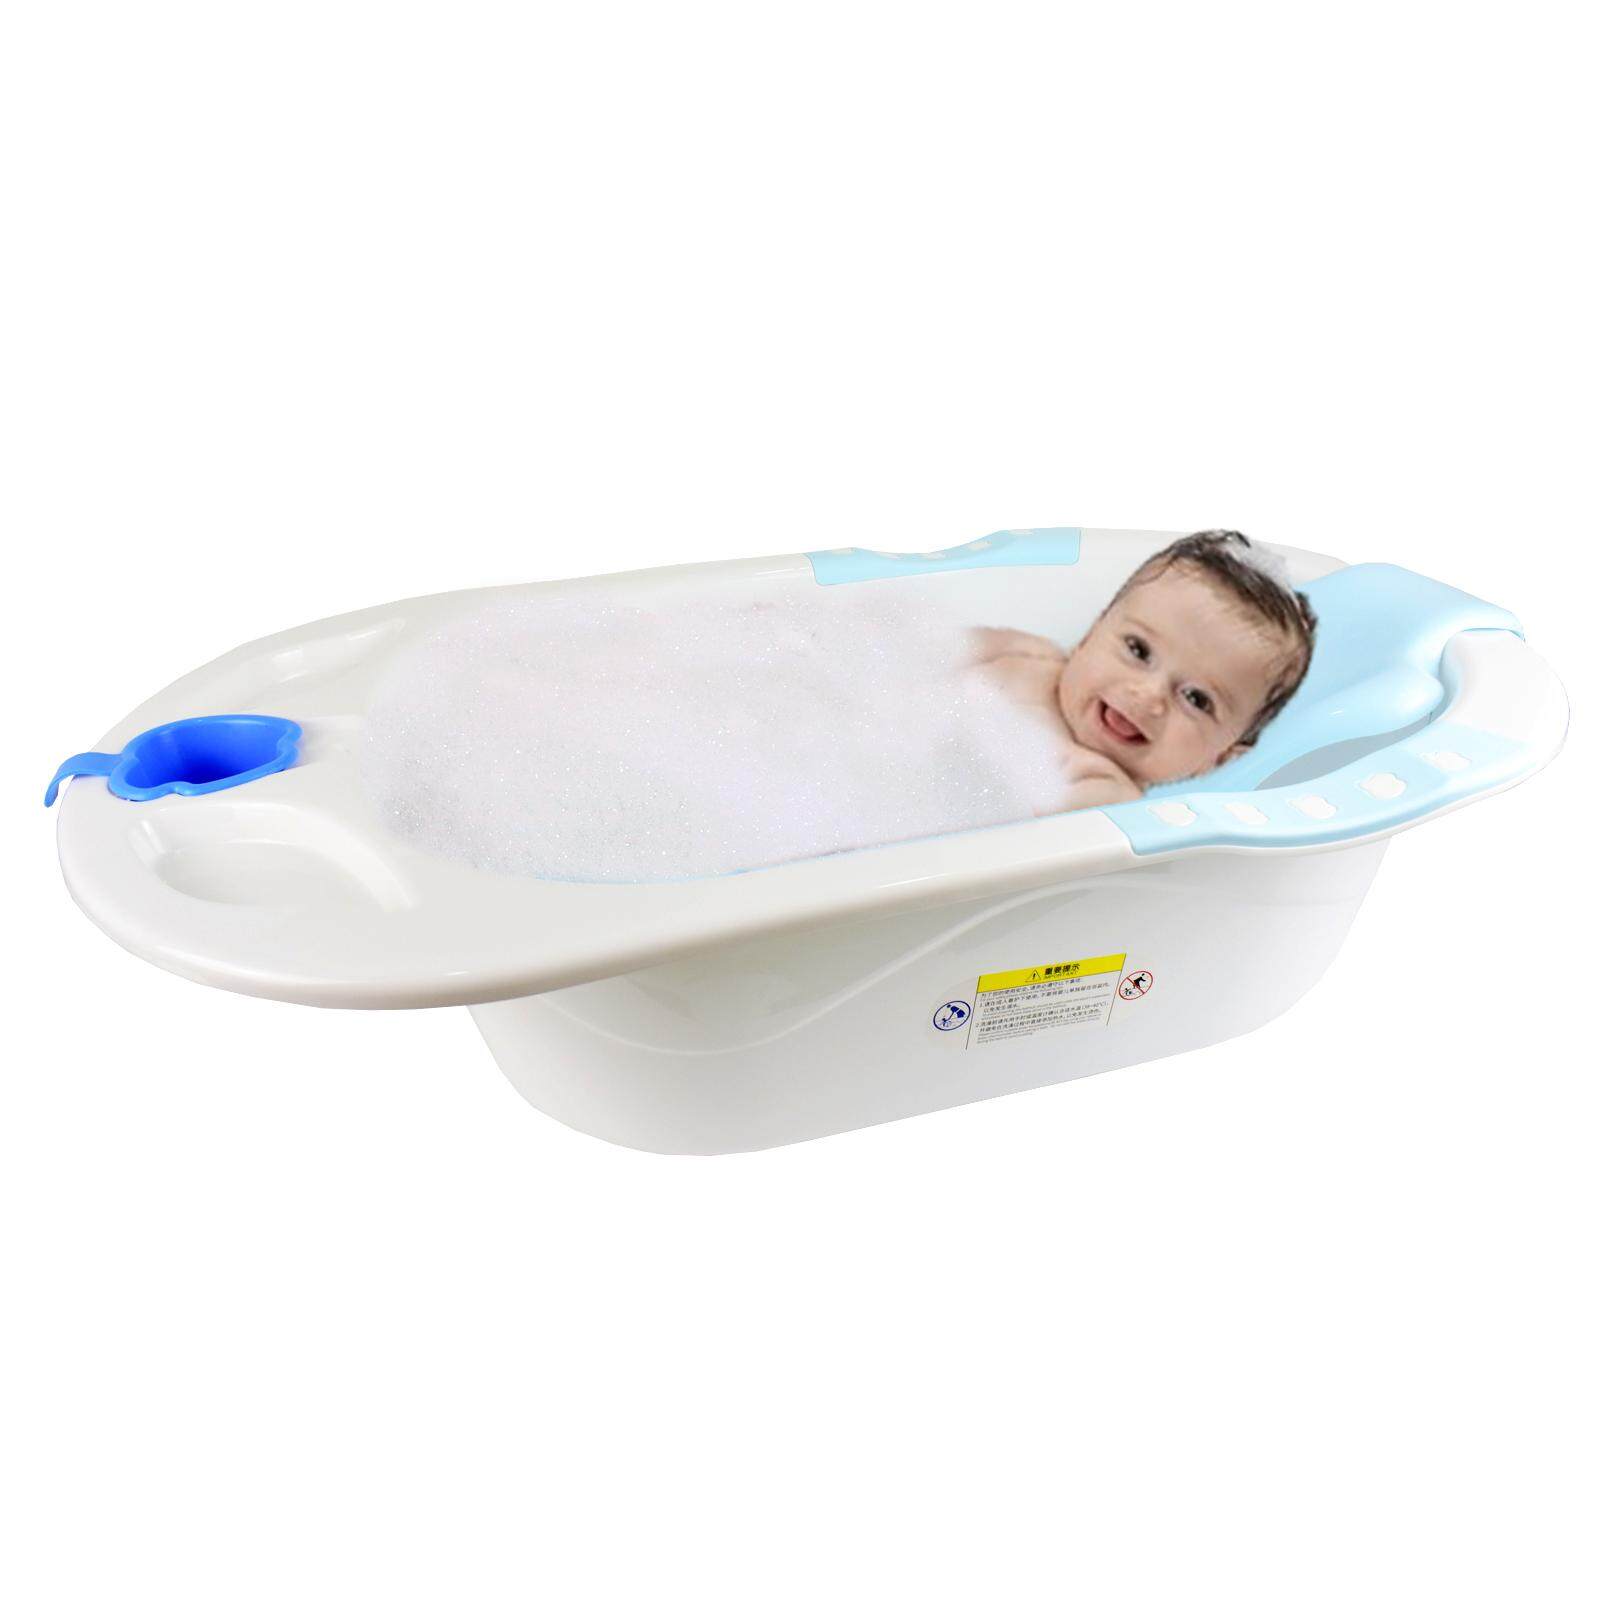 NaVa Baby Children PP Plastic XL Portable Bath Tub Age 0 - 6 with Supporter (BLUE)